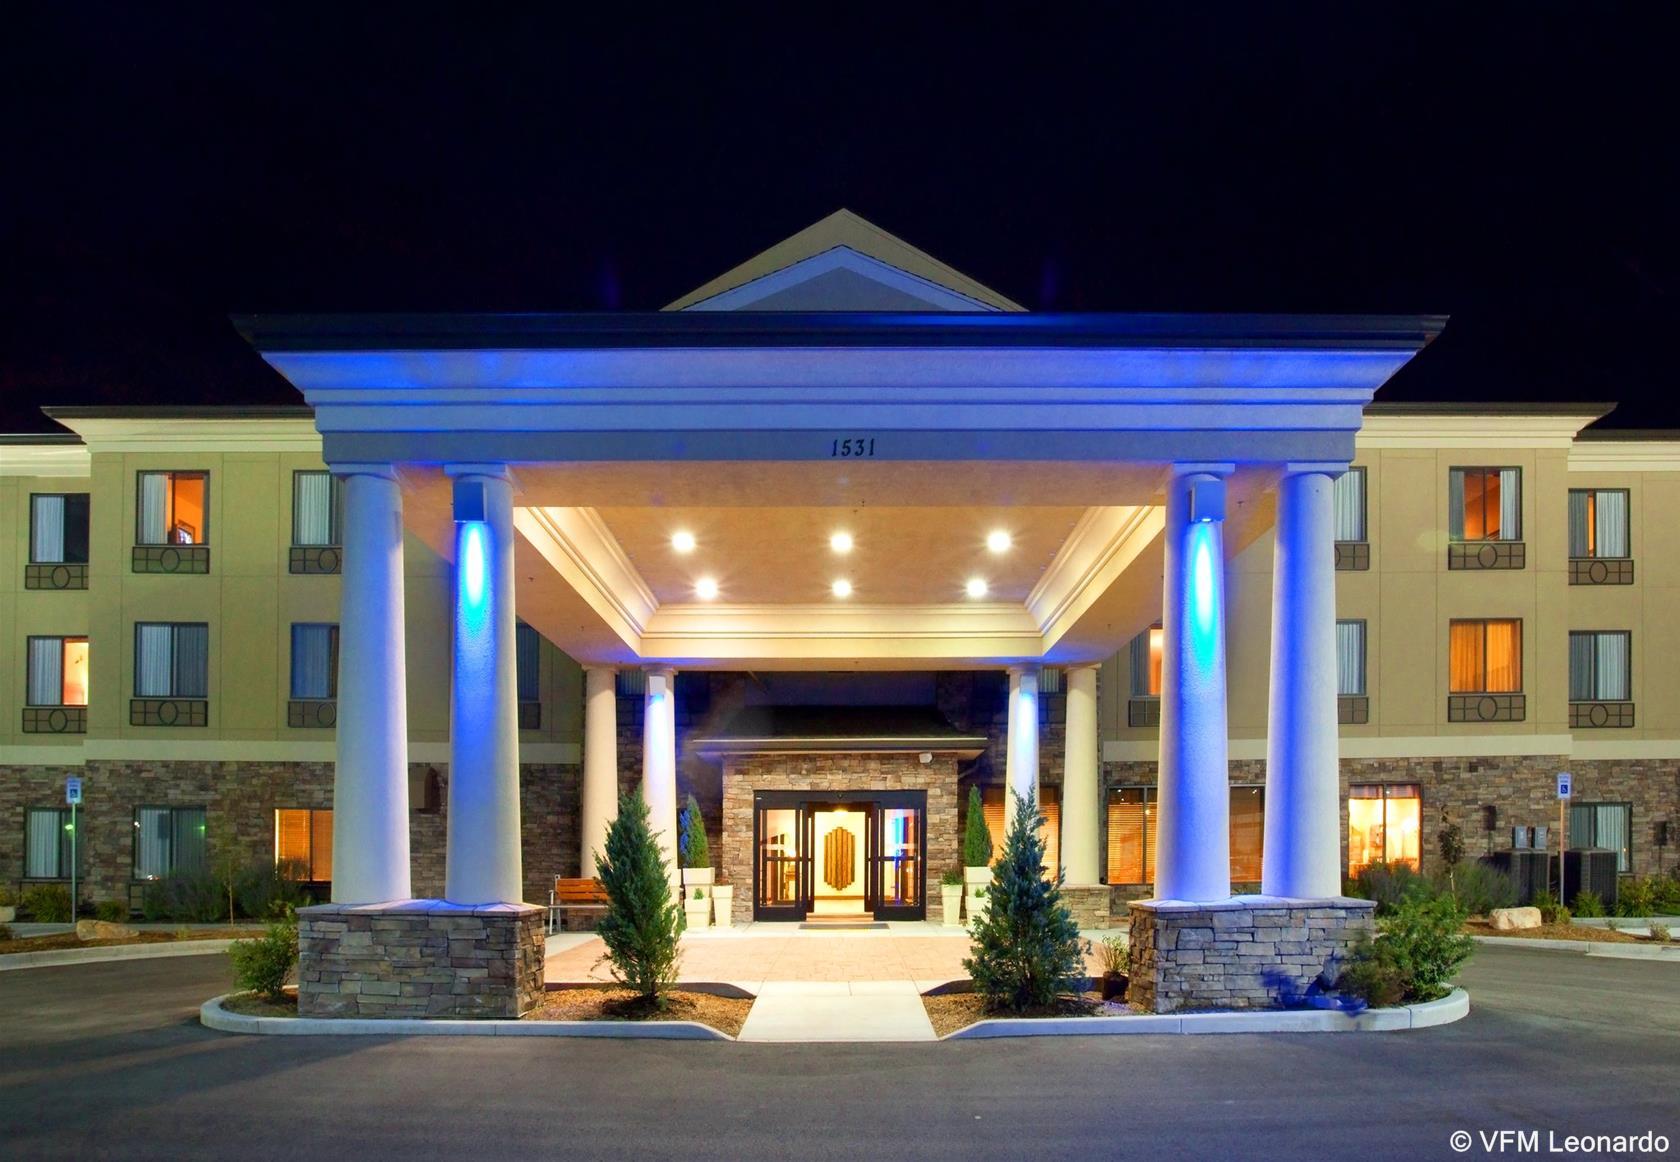 Holiday Inn Express Hotel & Suites Tooele